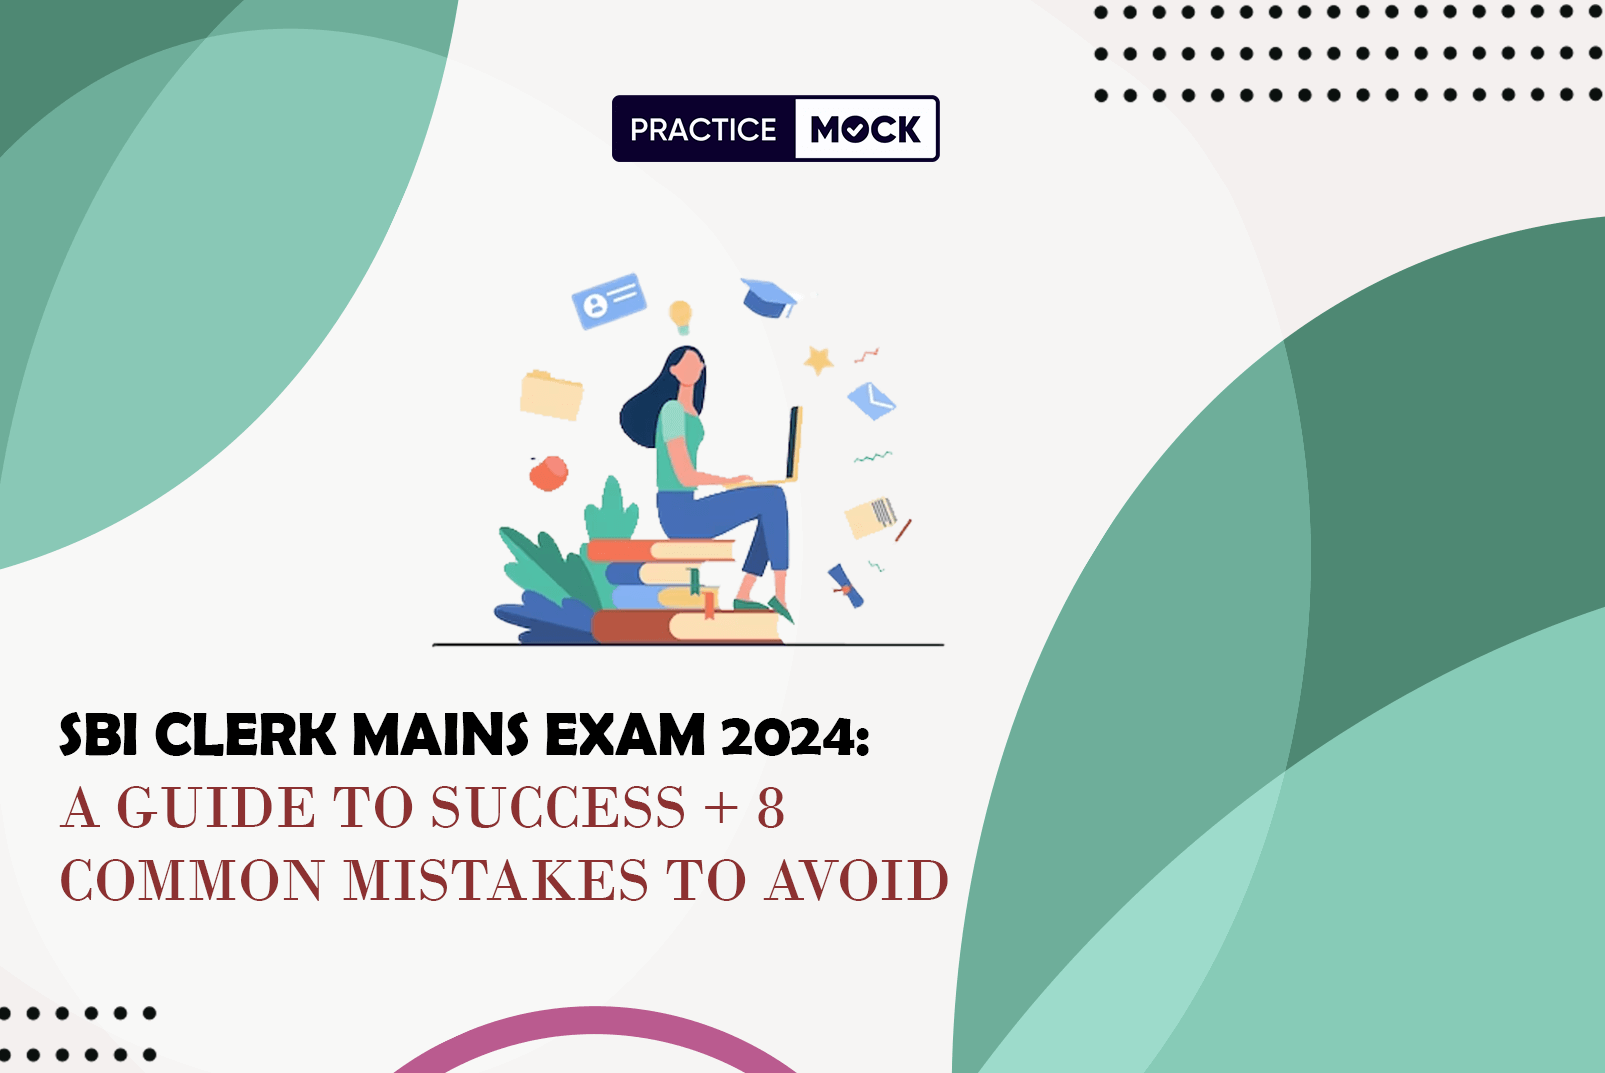 SBI Clerk Mains Exam 2024: A Guide to Success + 8 Common Mistakes to Avoid